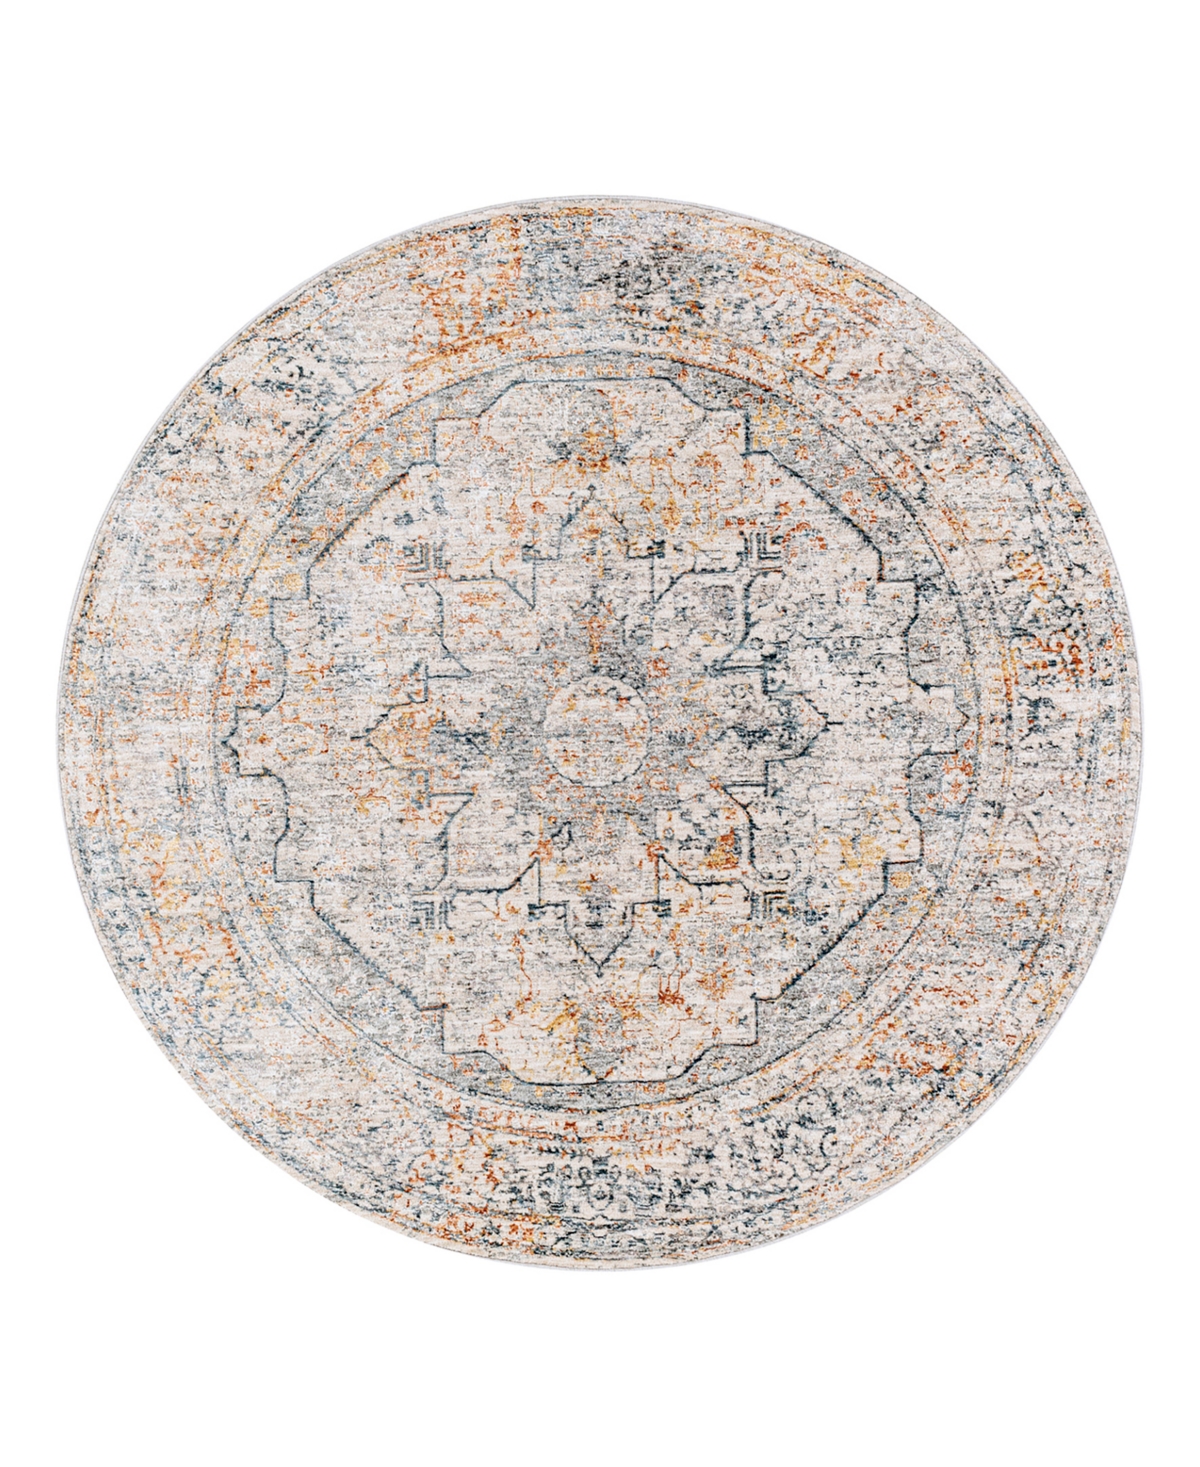 Shop Surya Laila Laa-2310 5'3x5'3 Round Area Rug In Silver